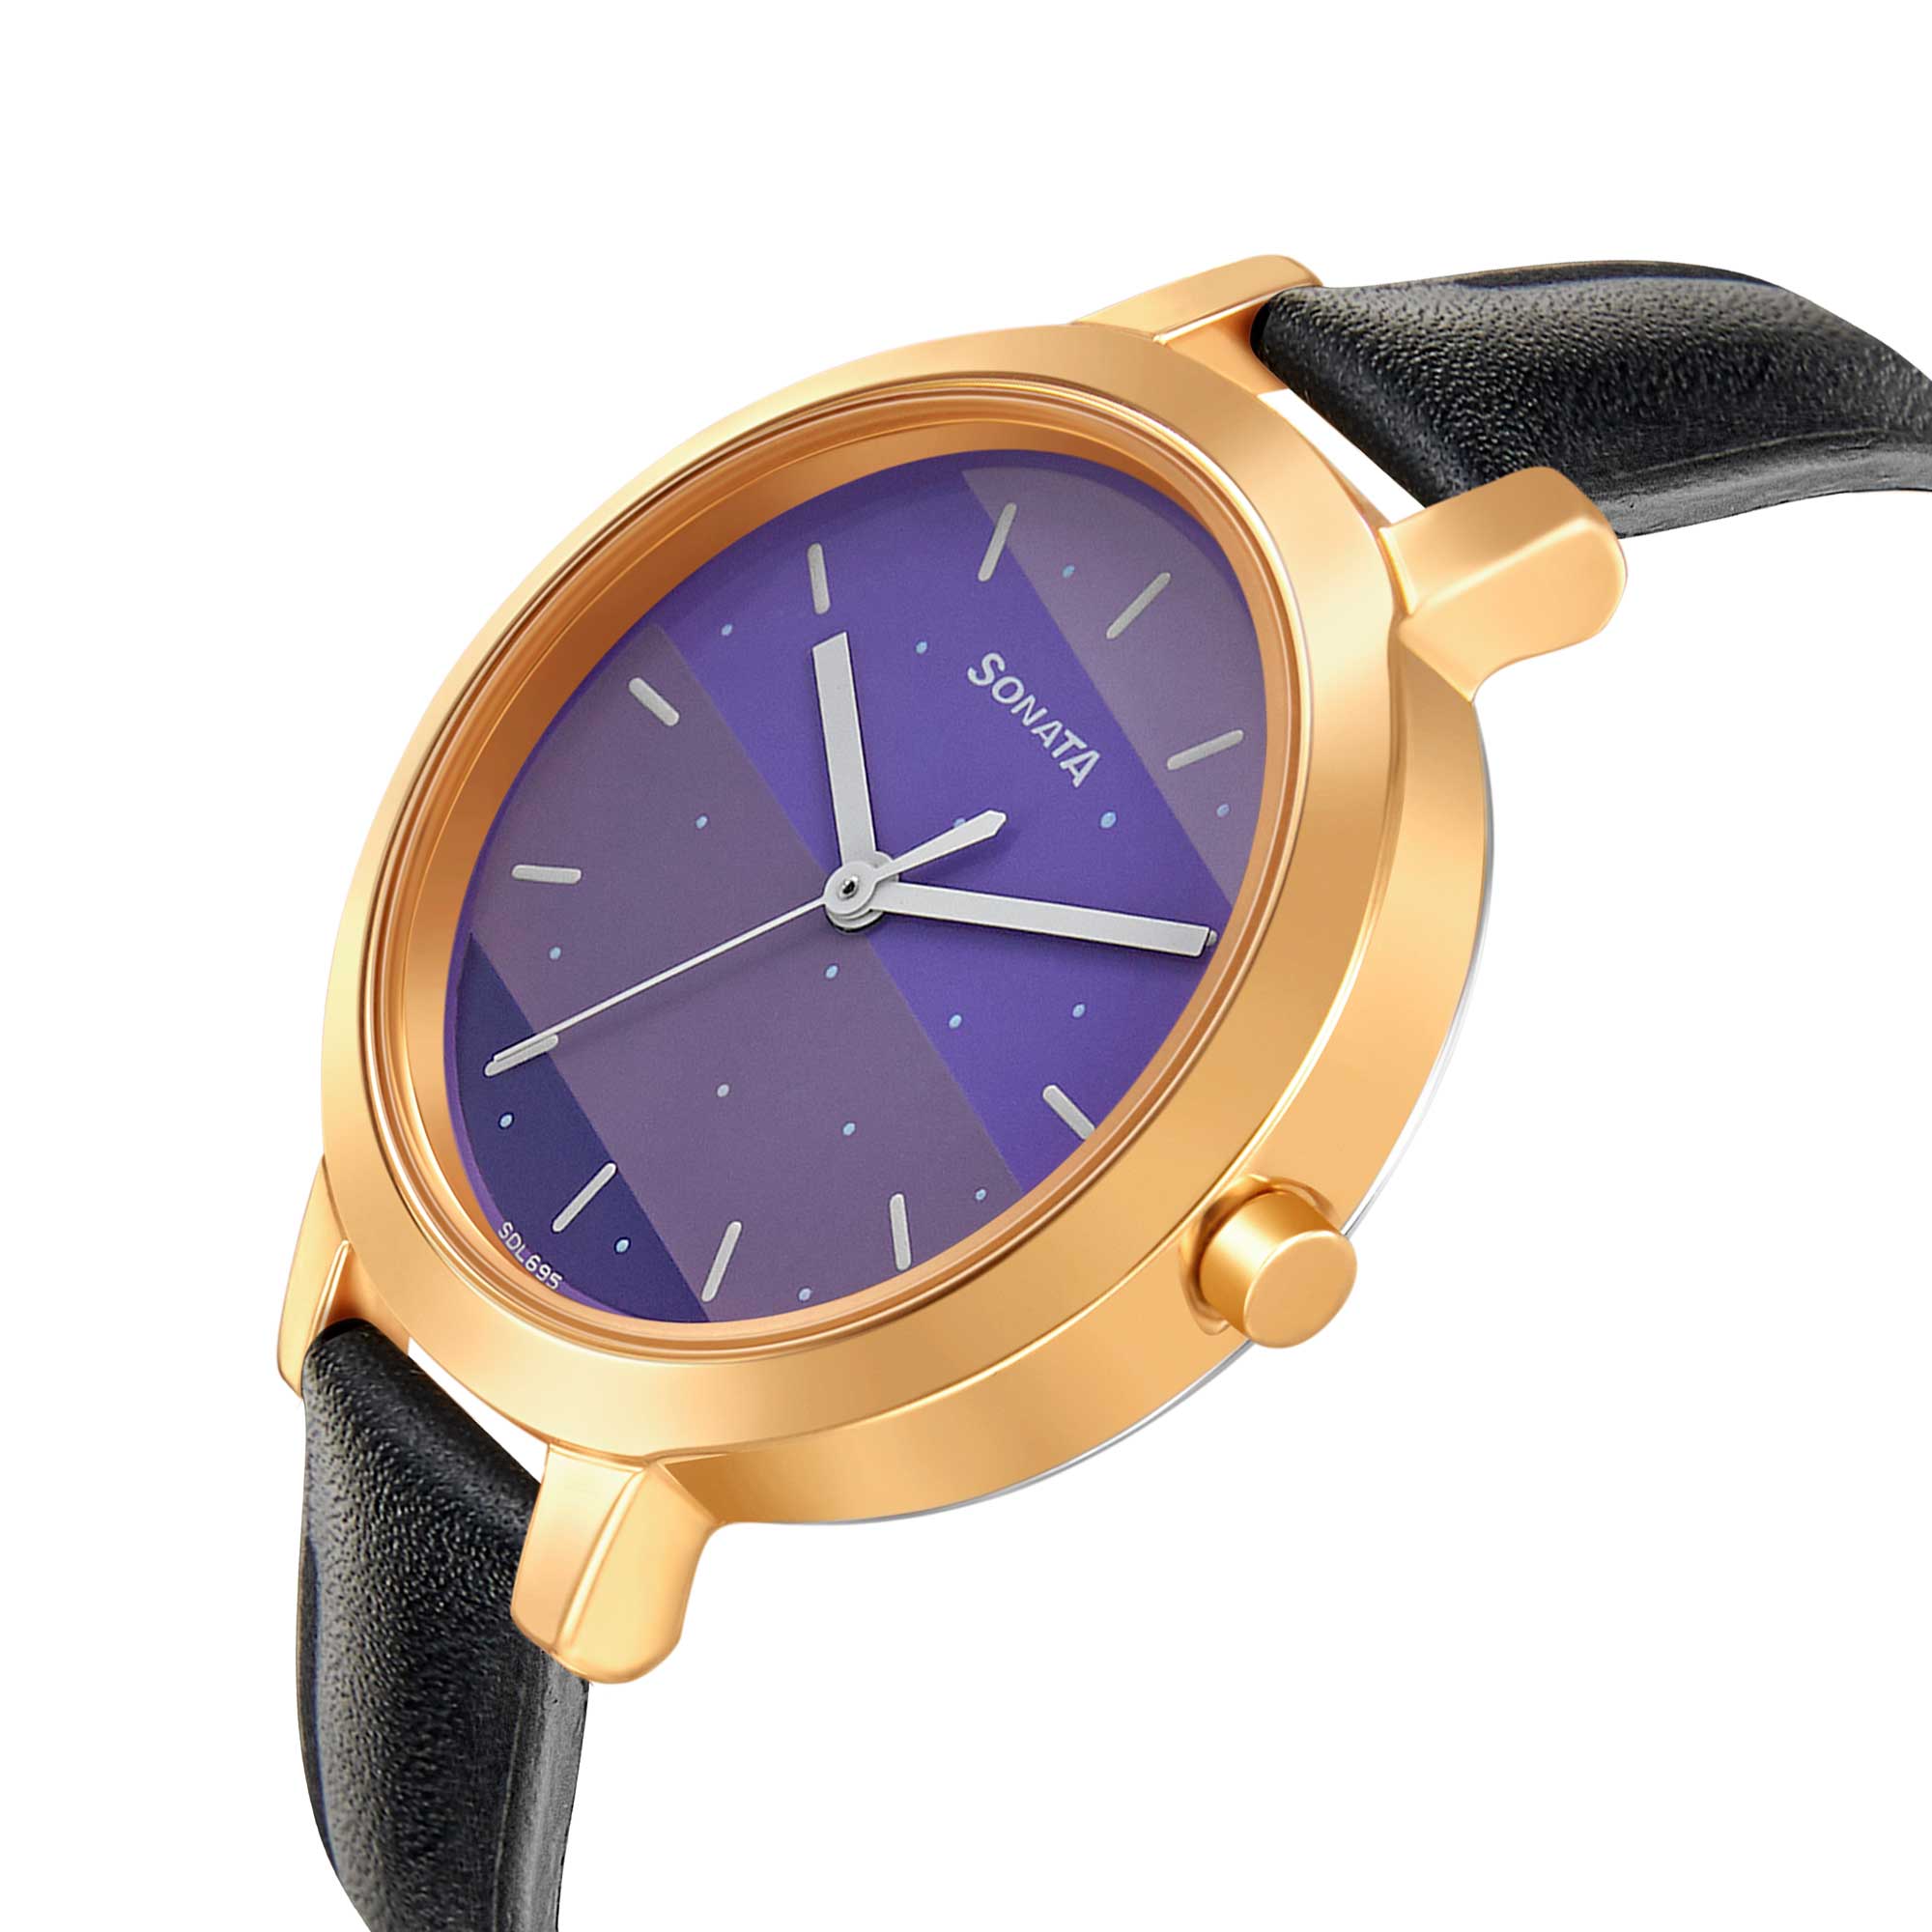 Sonata Play Purple Dial Women Watch With Leather Strap